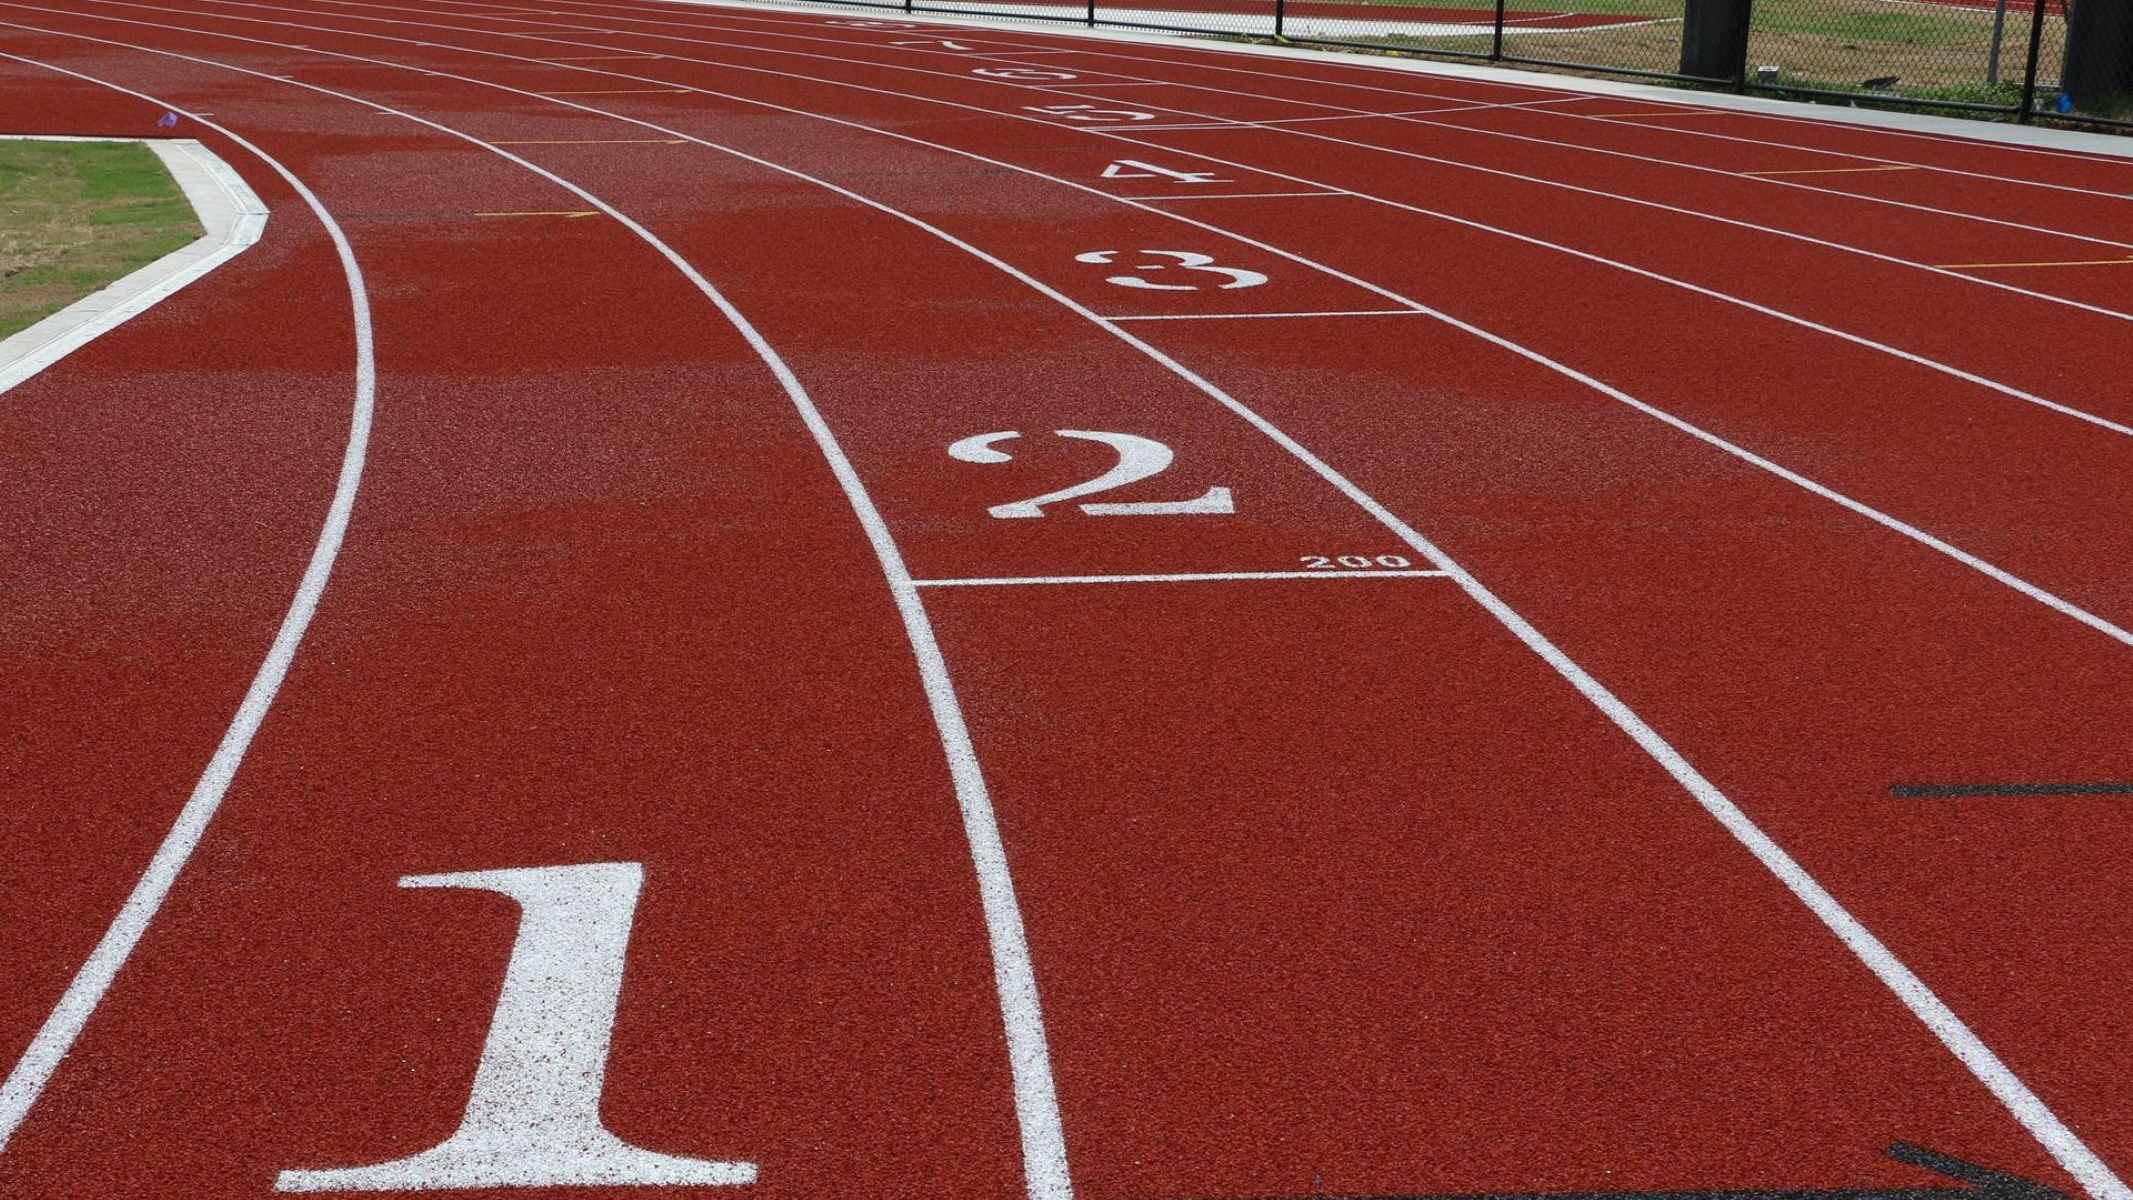 How Many Lanes Are In A Typical Track And Field